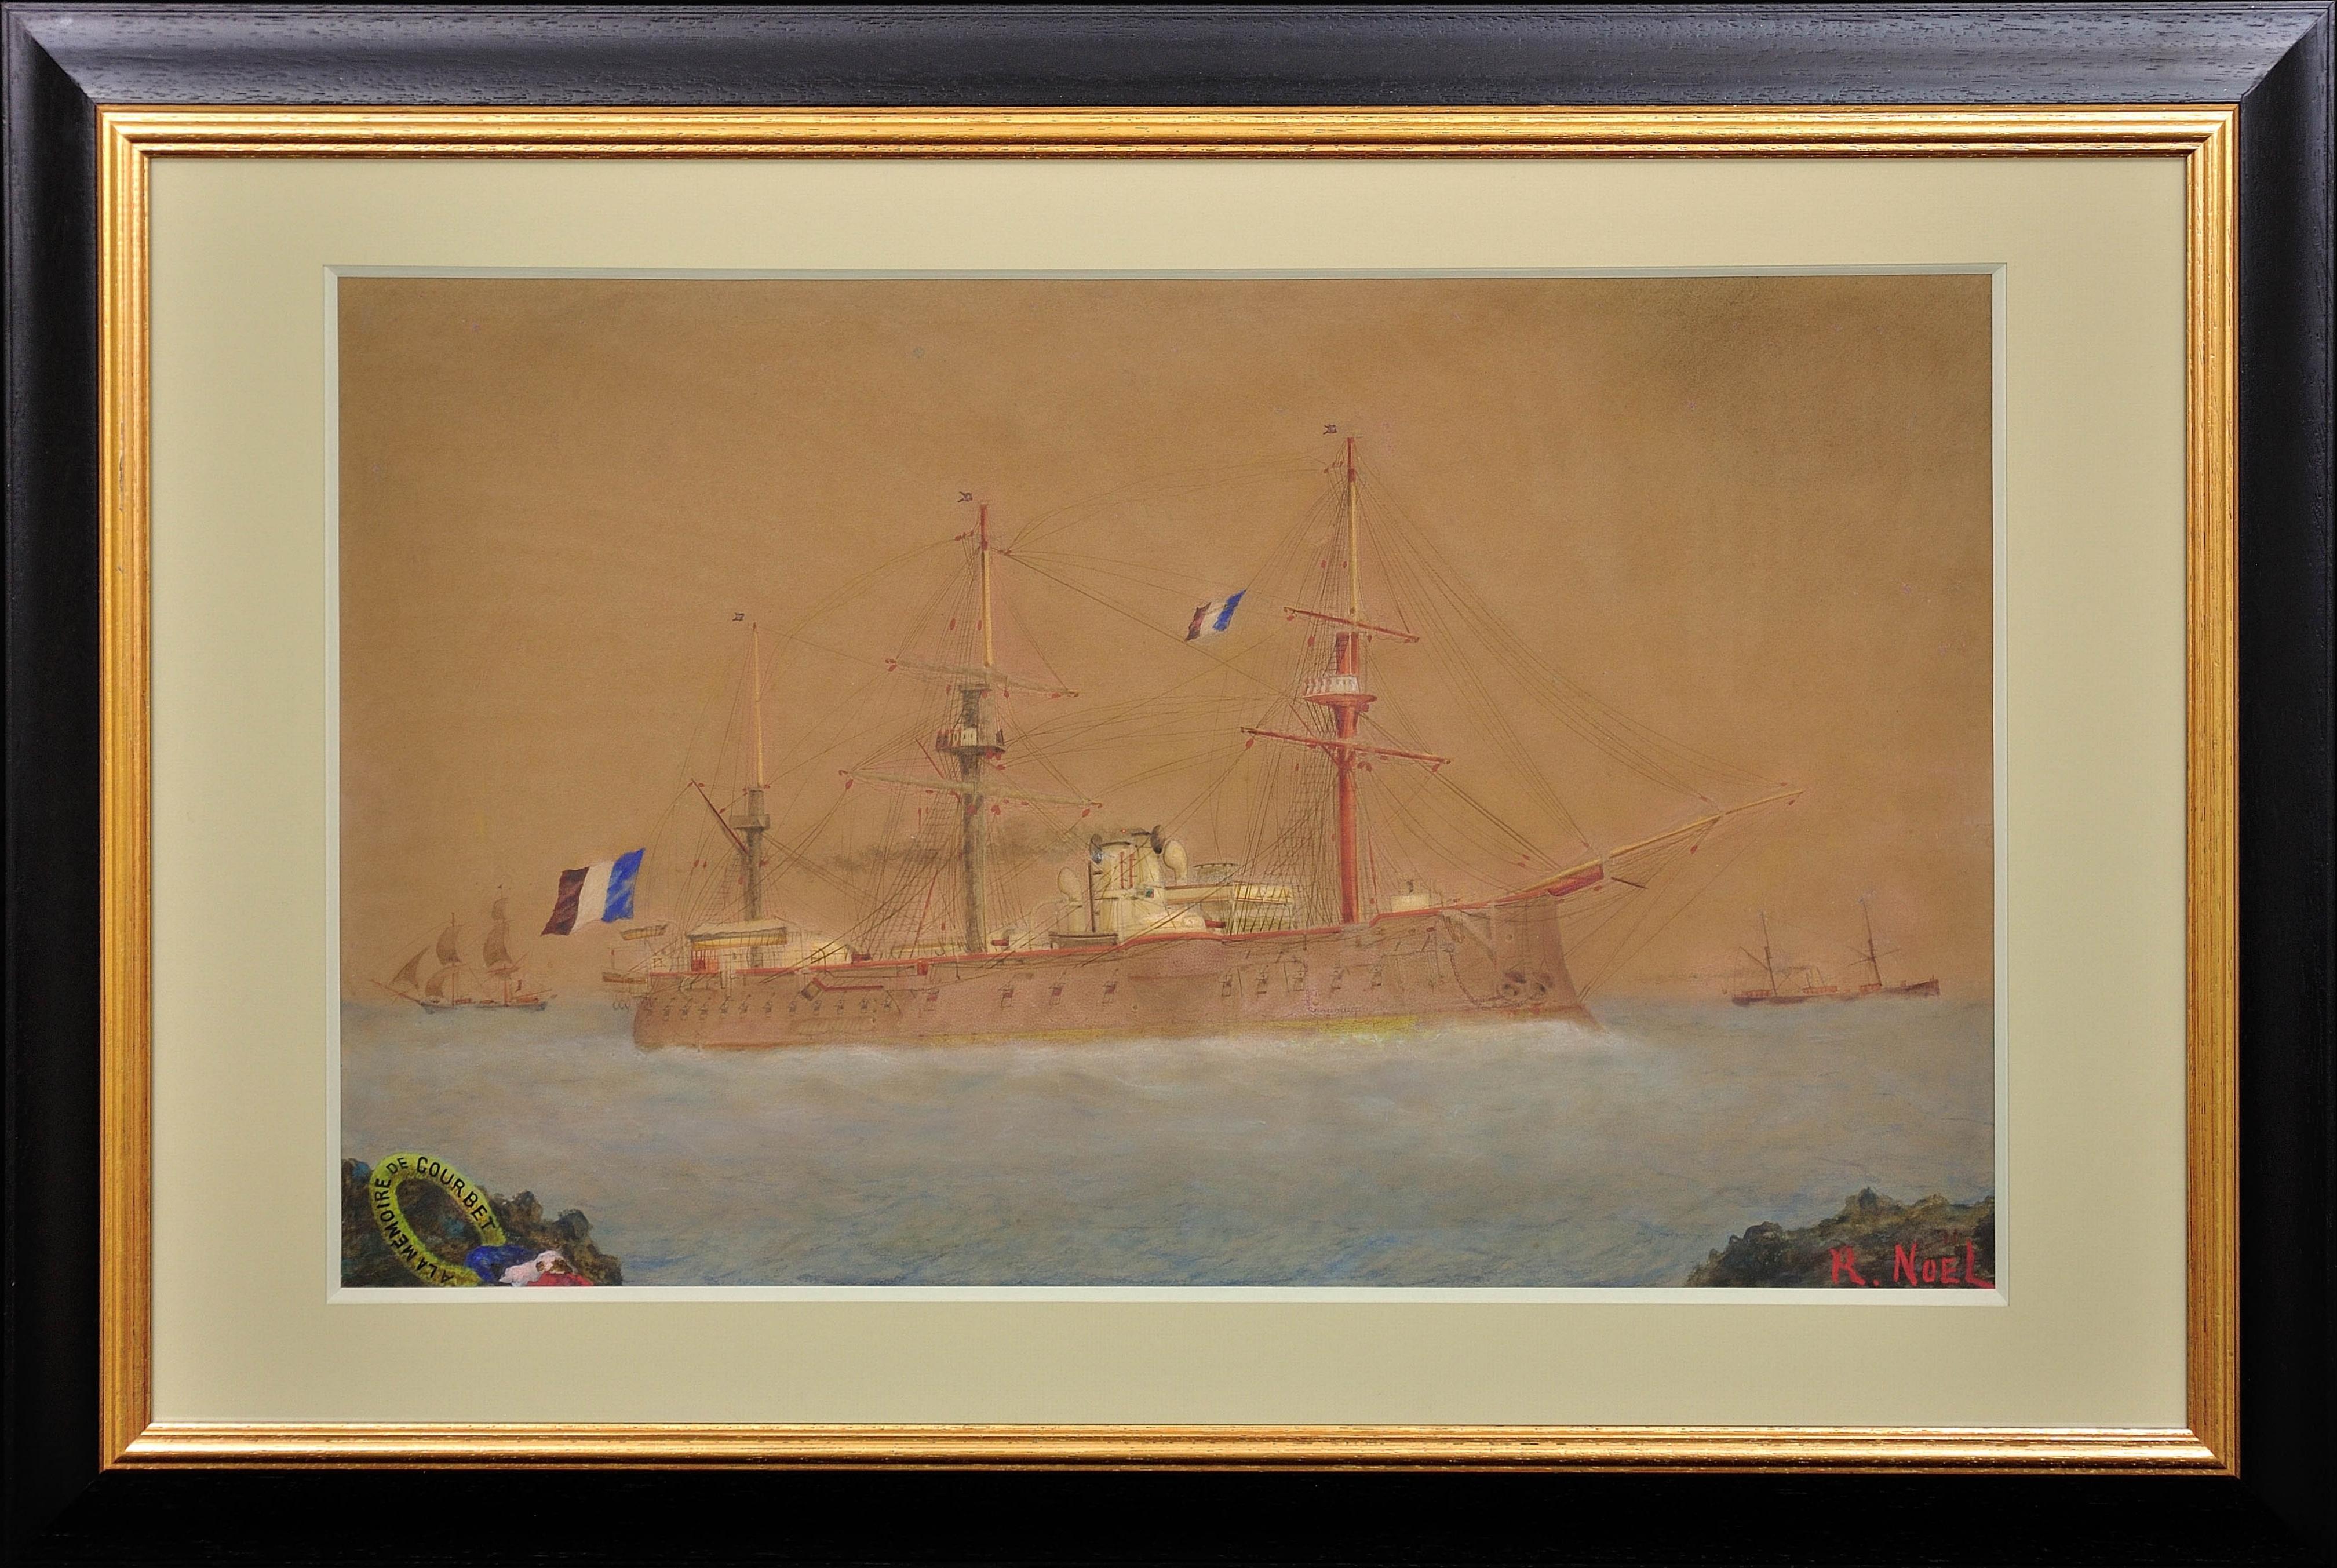 Unknown Landscape Art - French Navy Ironclad Warship Battleship Courbet. A Sailor’s Sentimental Tribute.